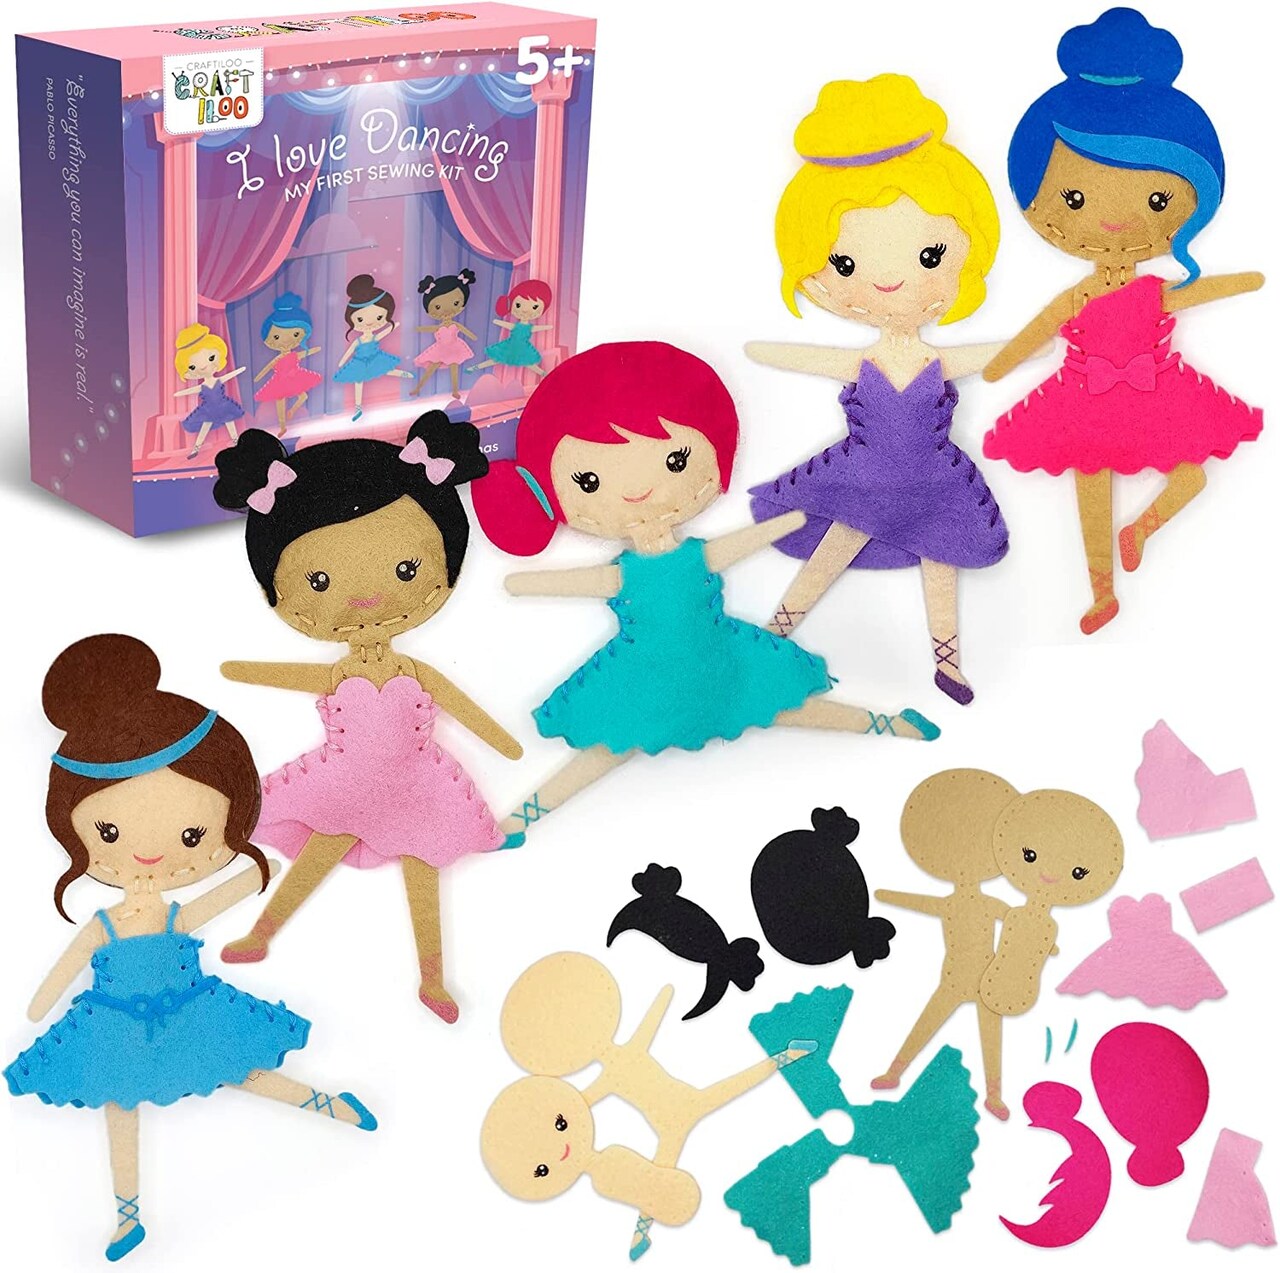 Ballerina Dancers Sewing Kit for Kids, Fun and Educational Craft